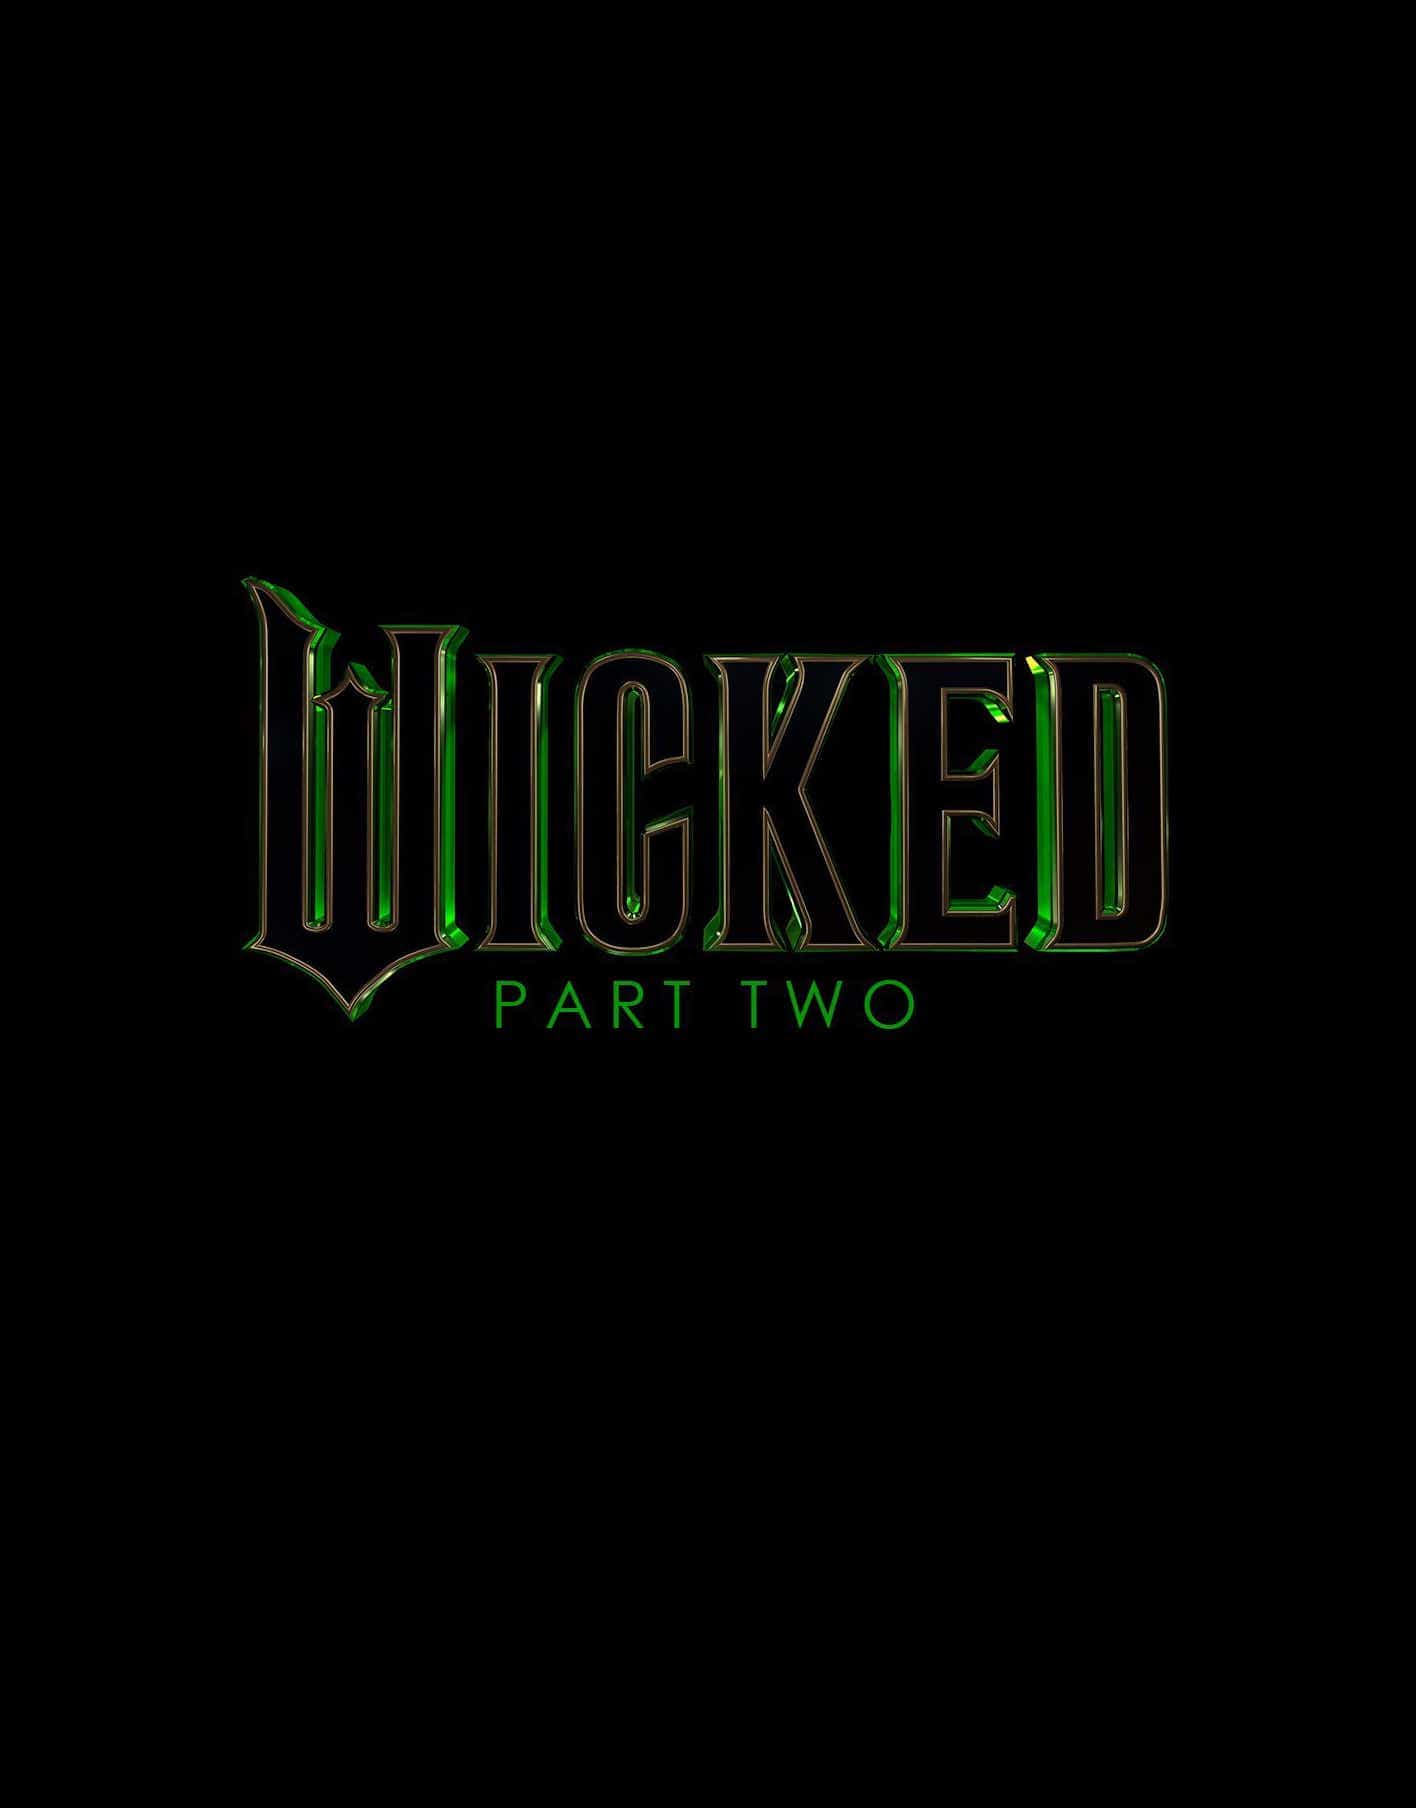 Wicked Part 1